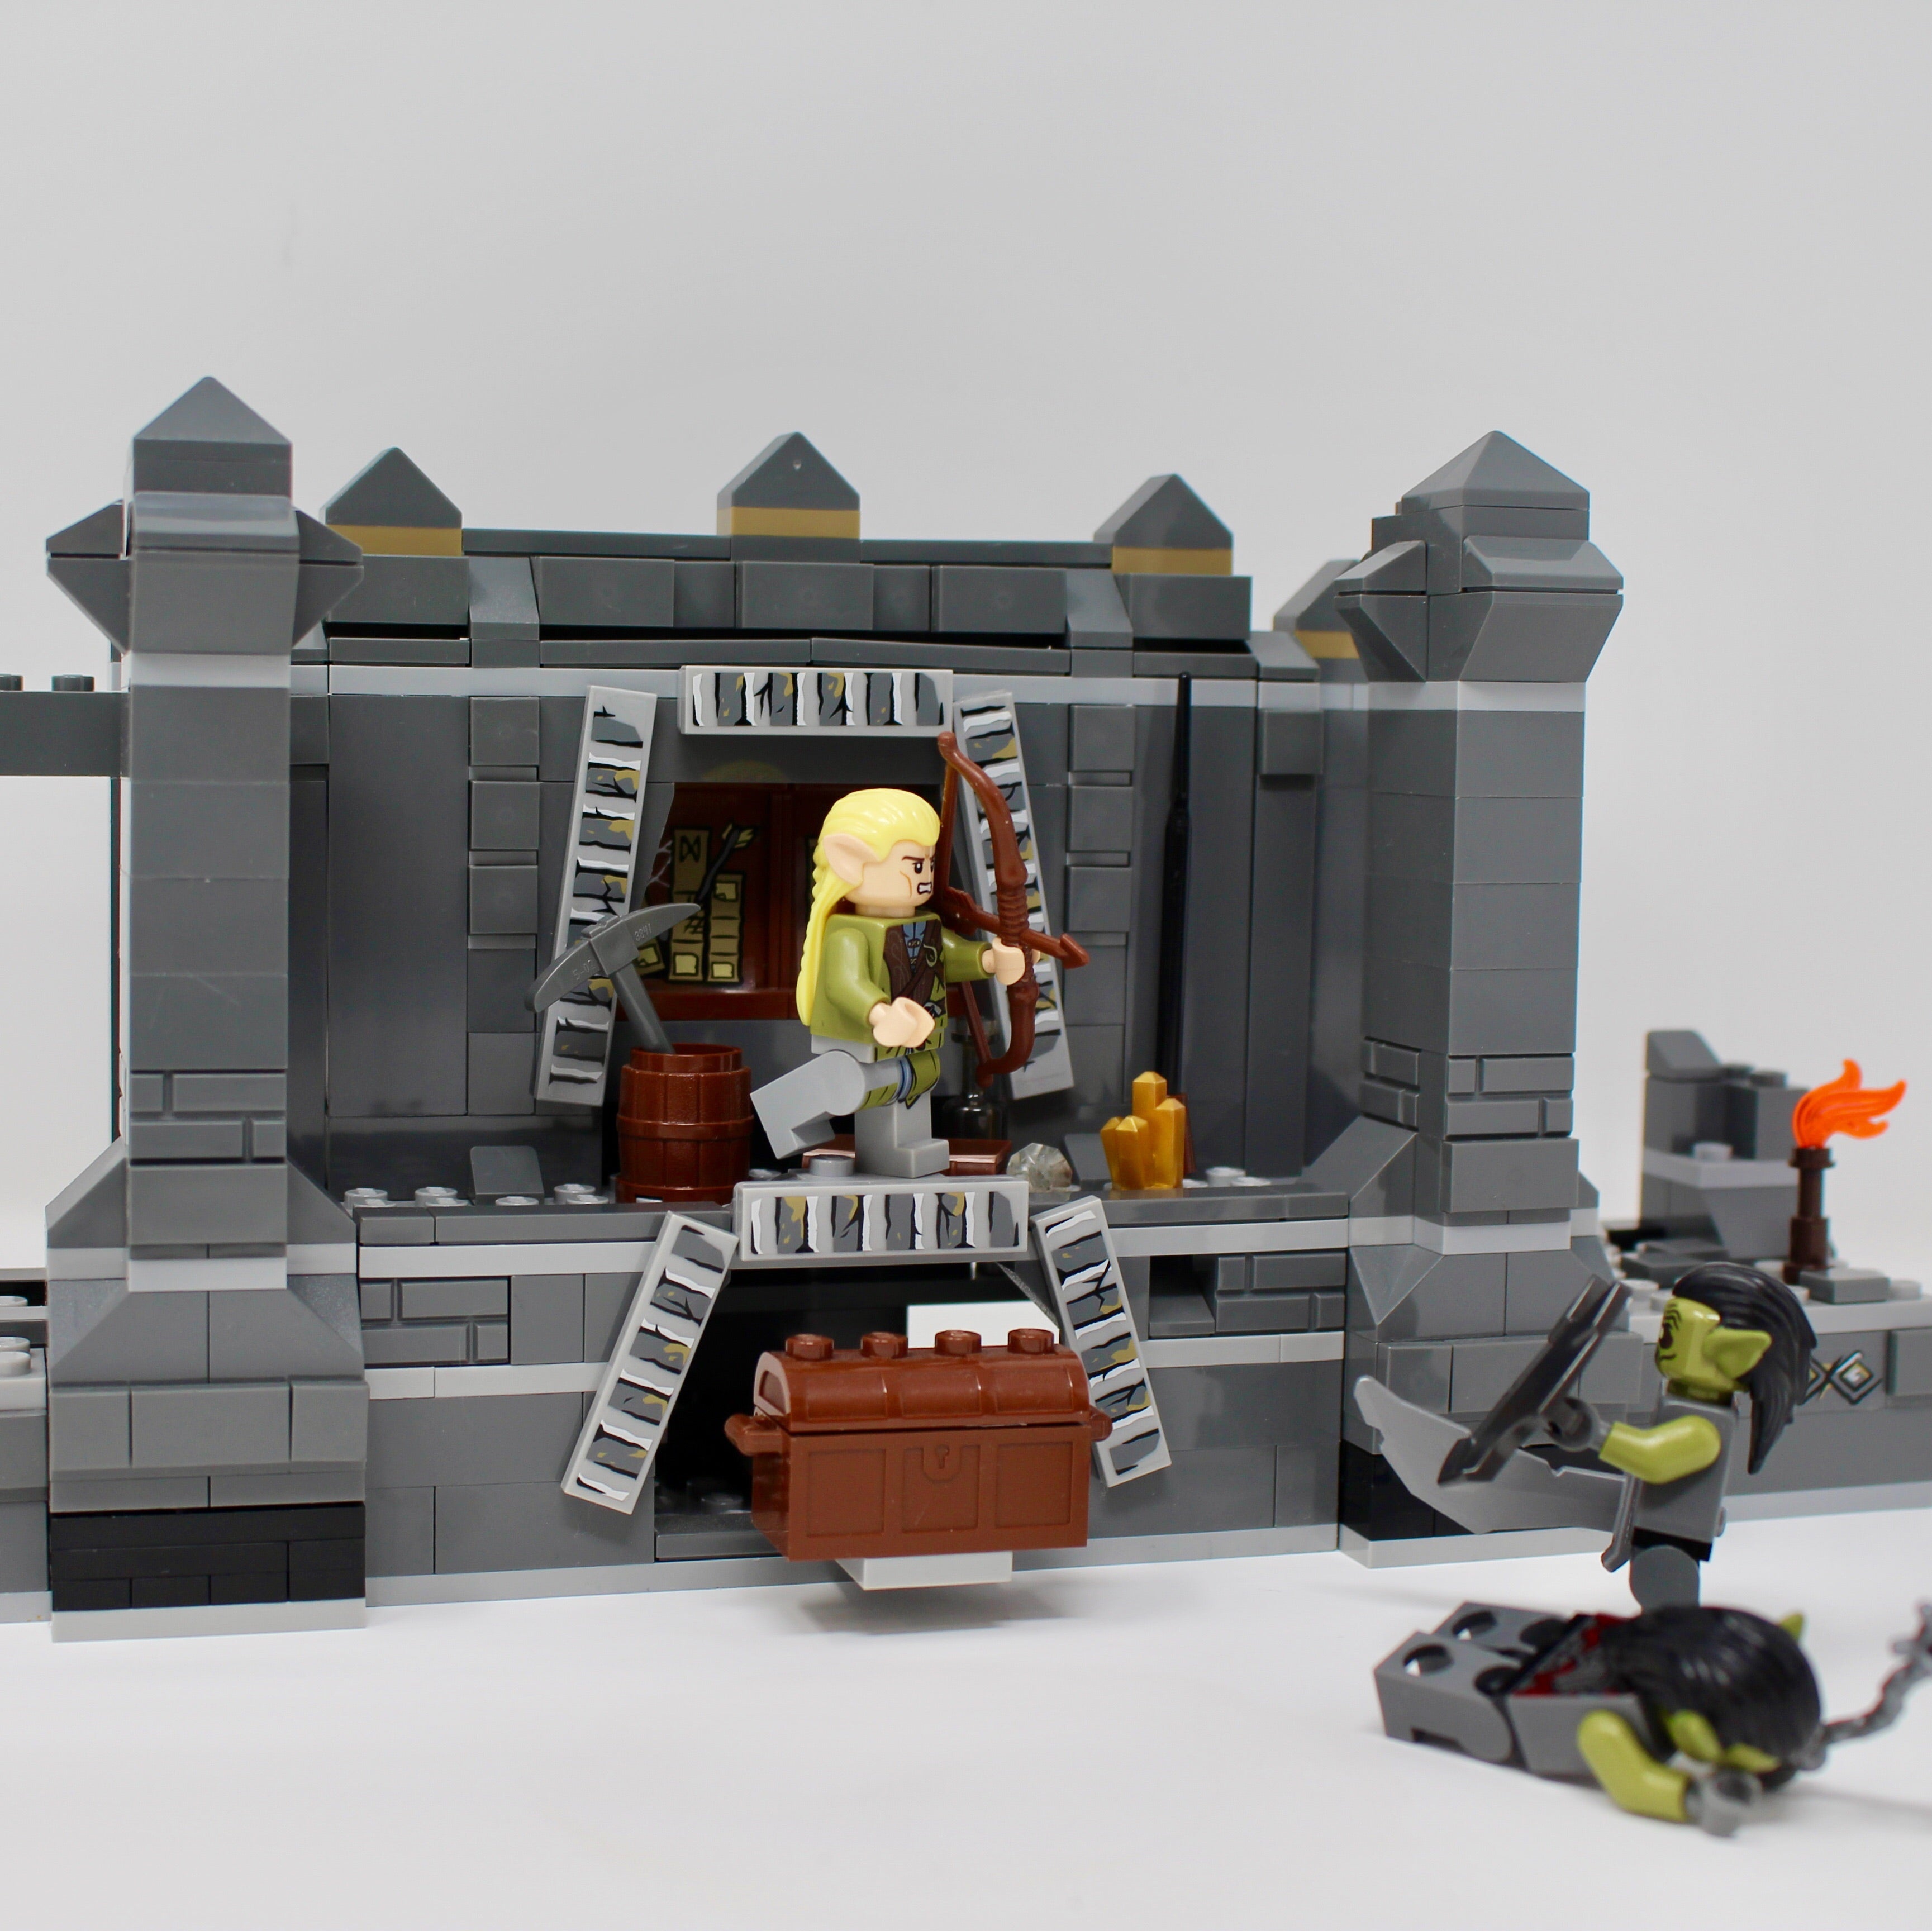 Used Set 9473 The Lord of the Rings The Mines of Moria